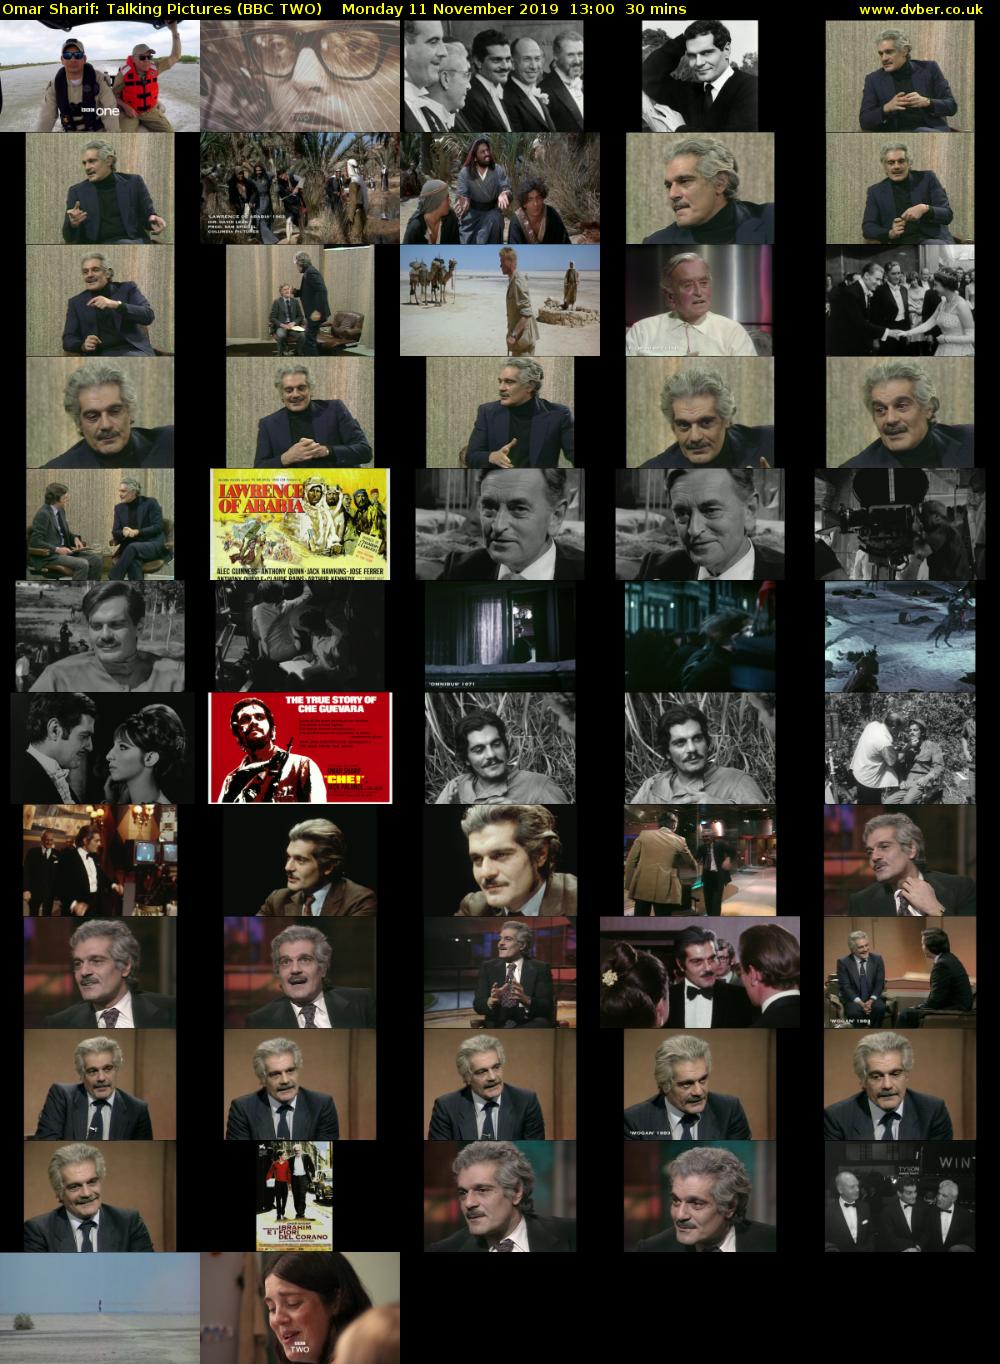 Omar Sharif: Talking Pictures (BBC TWO) Monday 11 November 2019 13:00 - 13:30